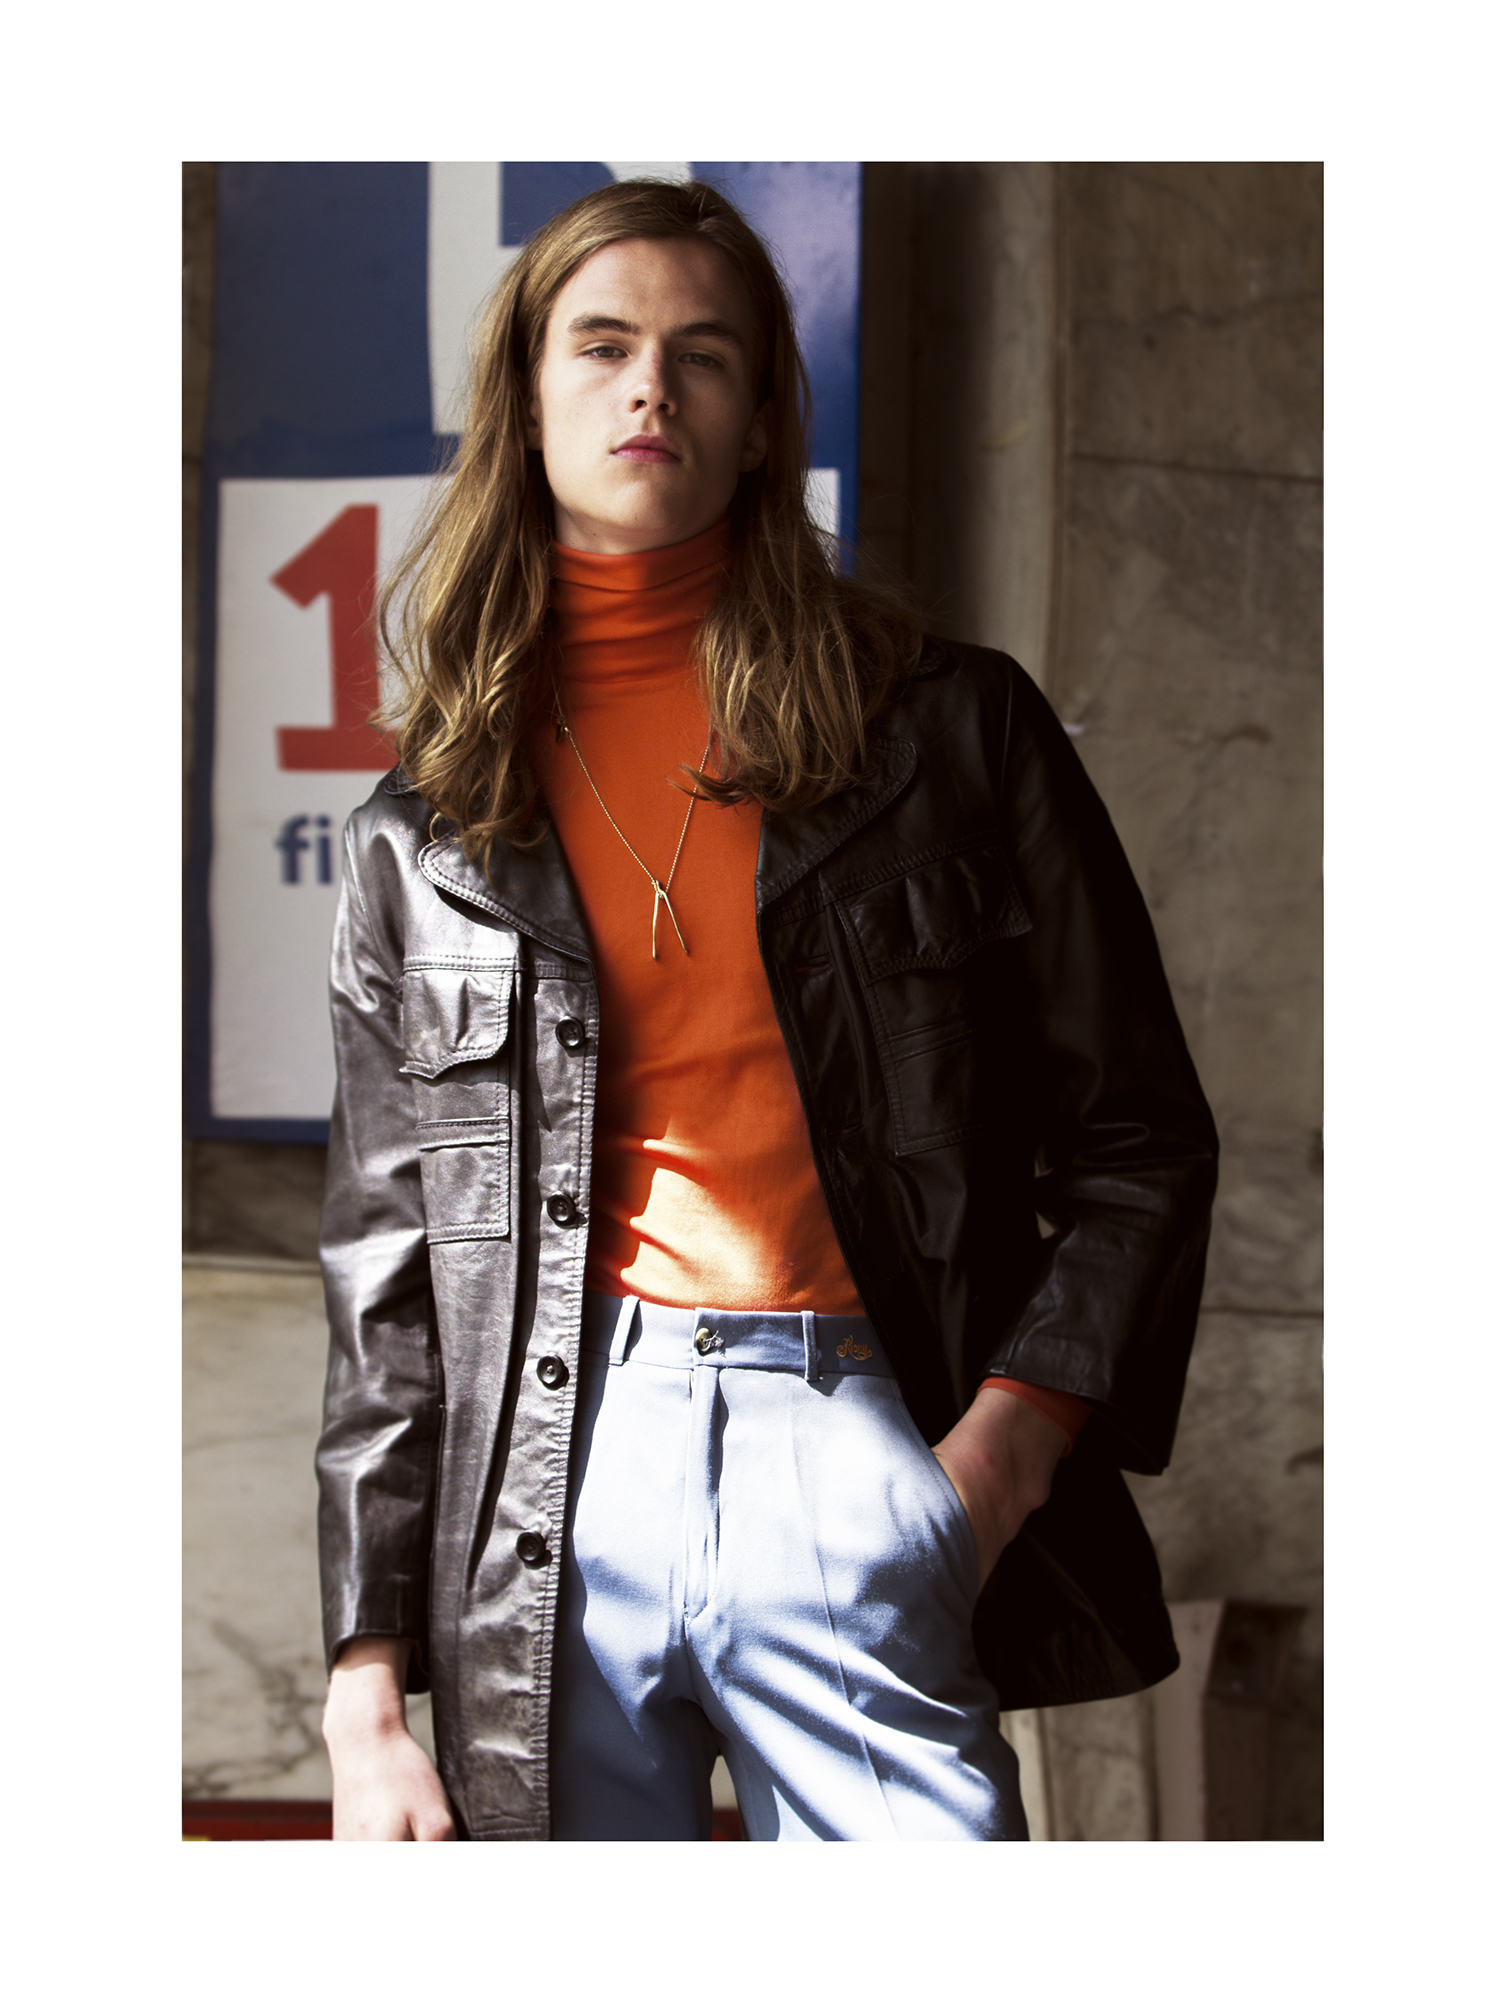 Malcolm Lindberg Has a 1970s Inspired Fashion Moment